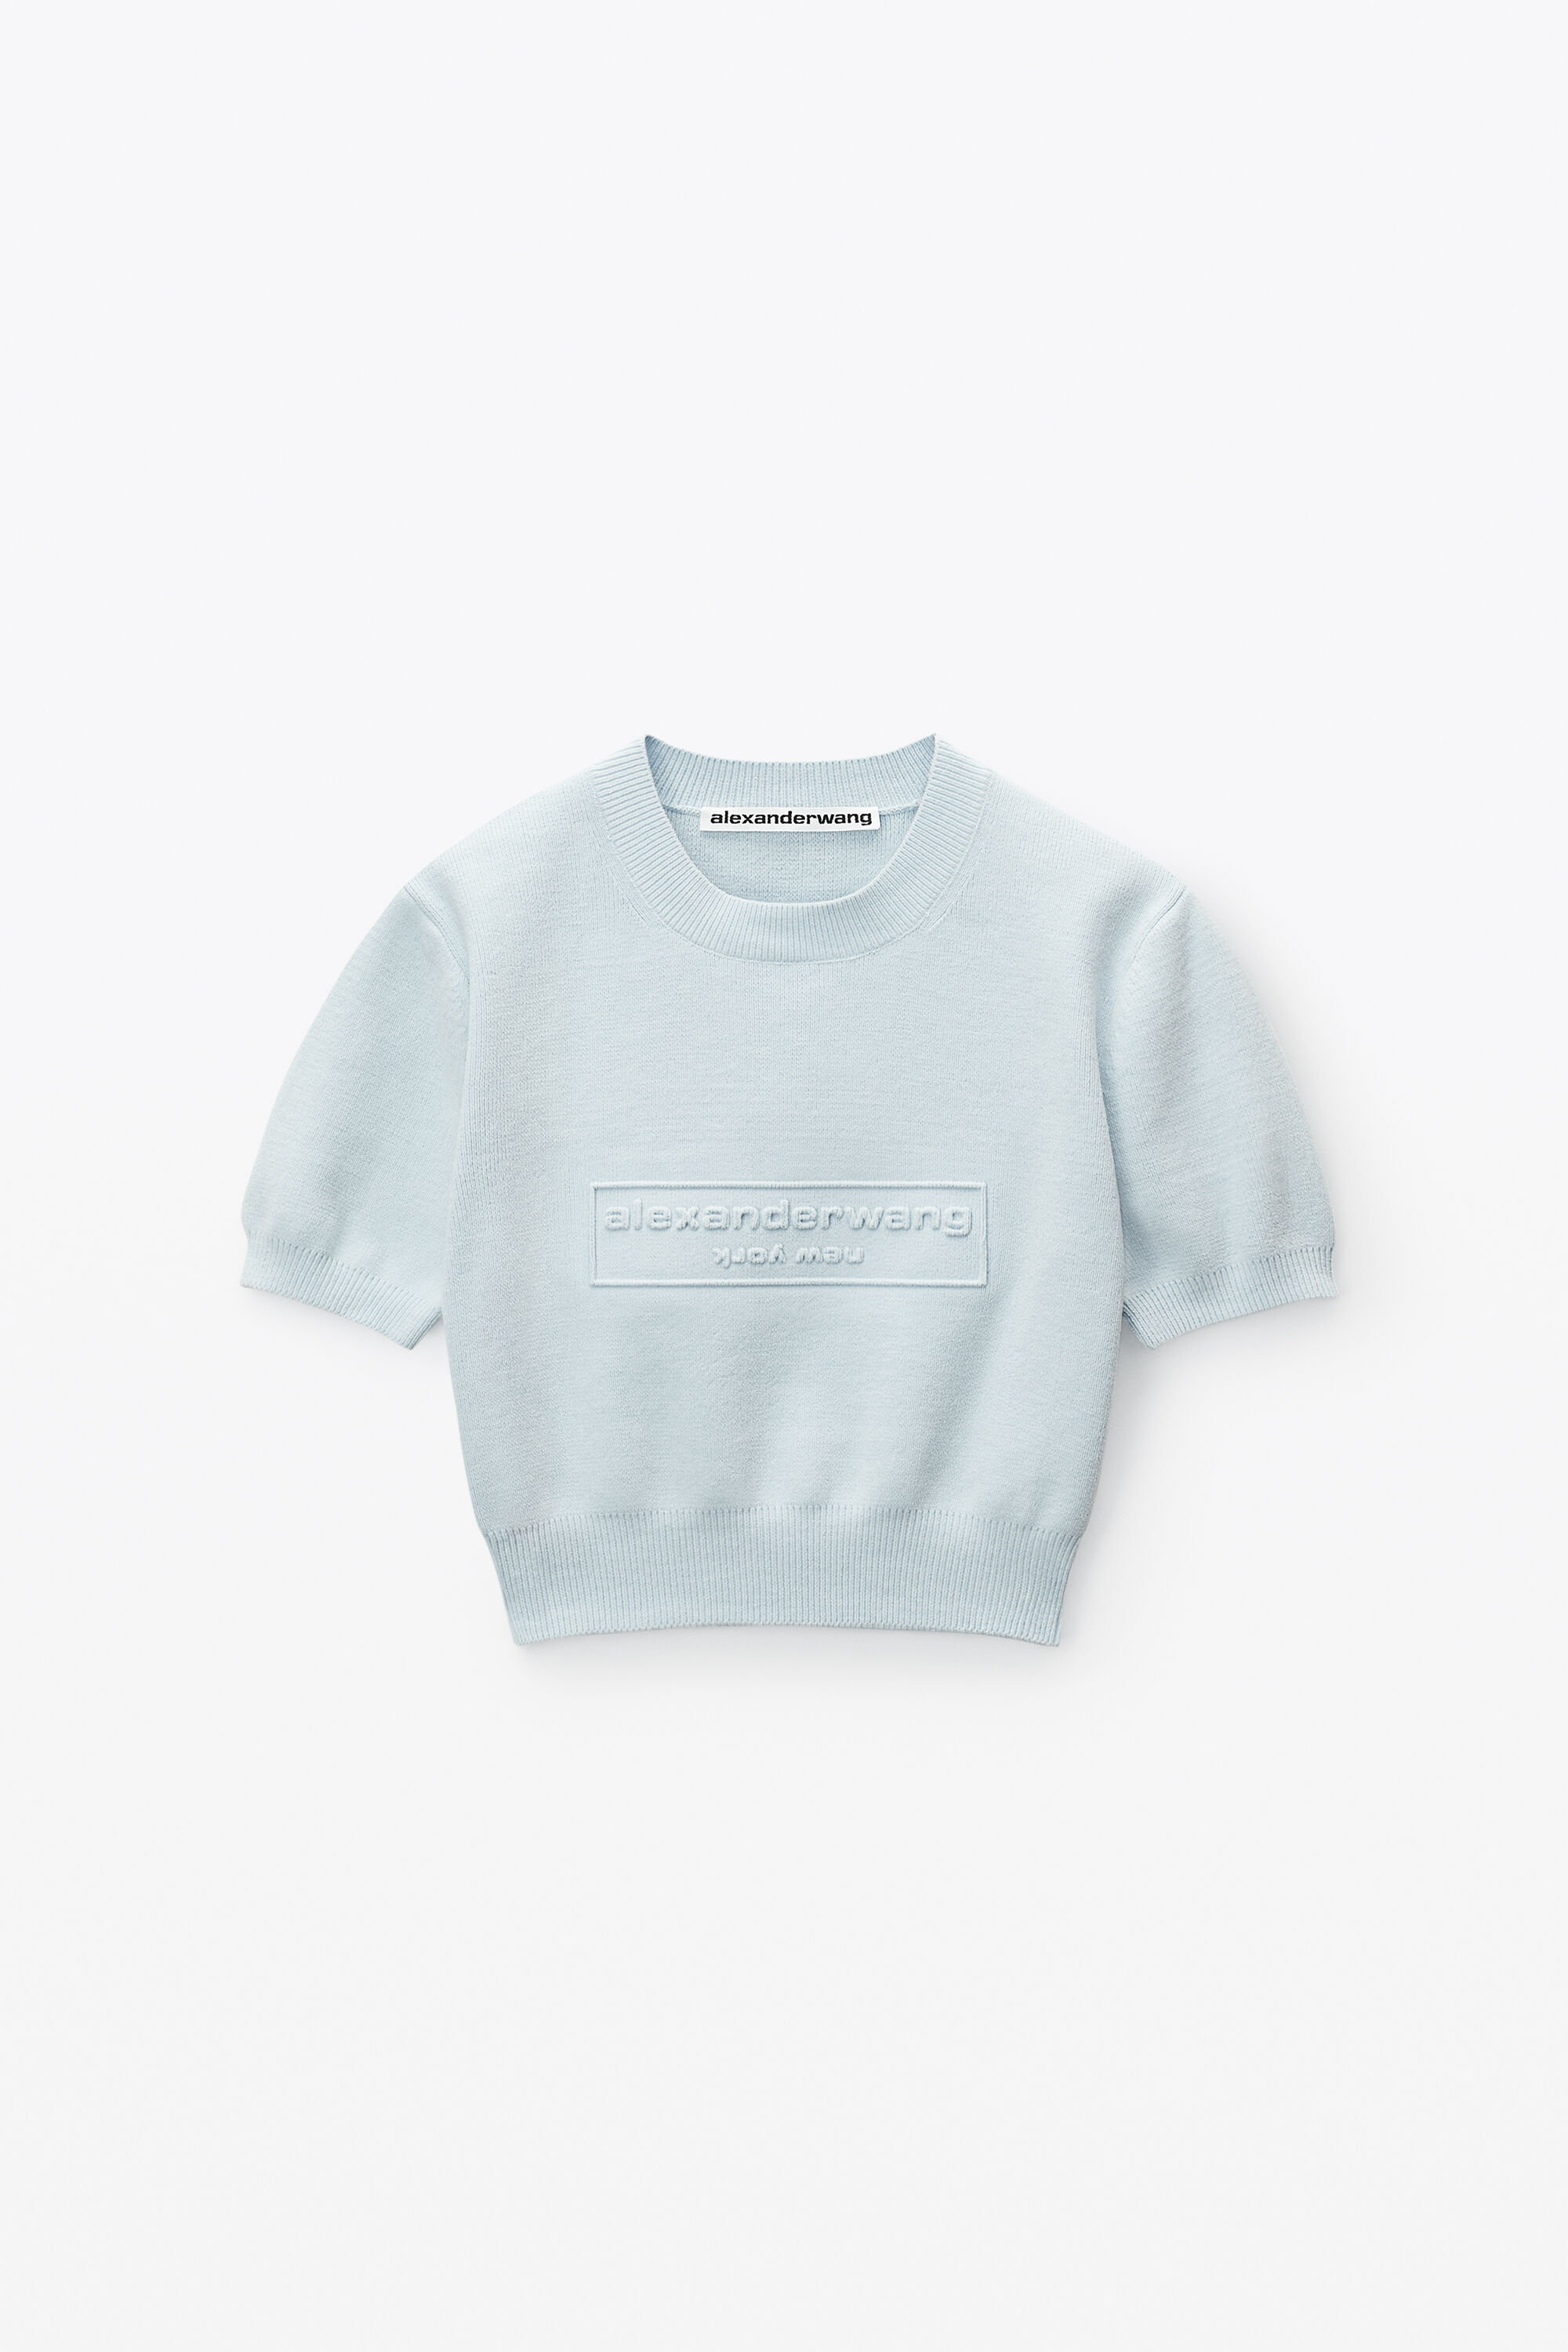 SWEATER TEE IN RIBBED CHENILLE in ARIEL BLUE 